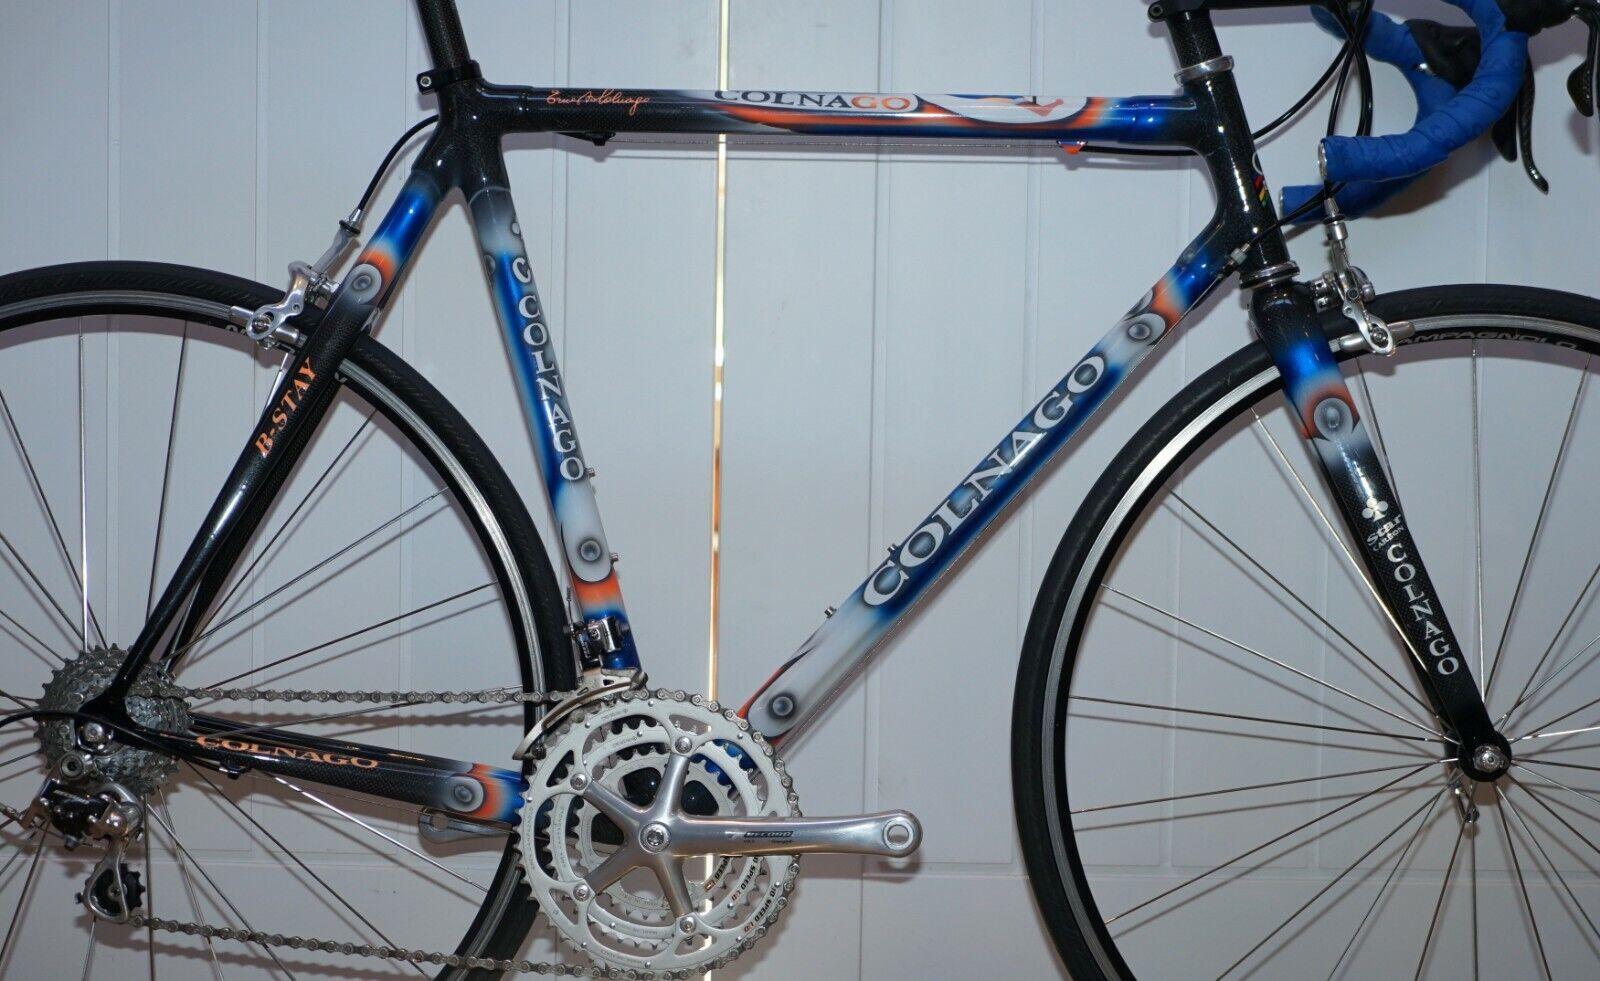 We are delighted to offer for sale this super rare highly collectable Colnago C40 Dream B-Stay full carbon road bike with the rarely seen Campagnolo Record carbon triple groupset

HISTORY

I am selling my entire bike collection which comprises